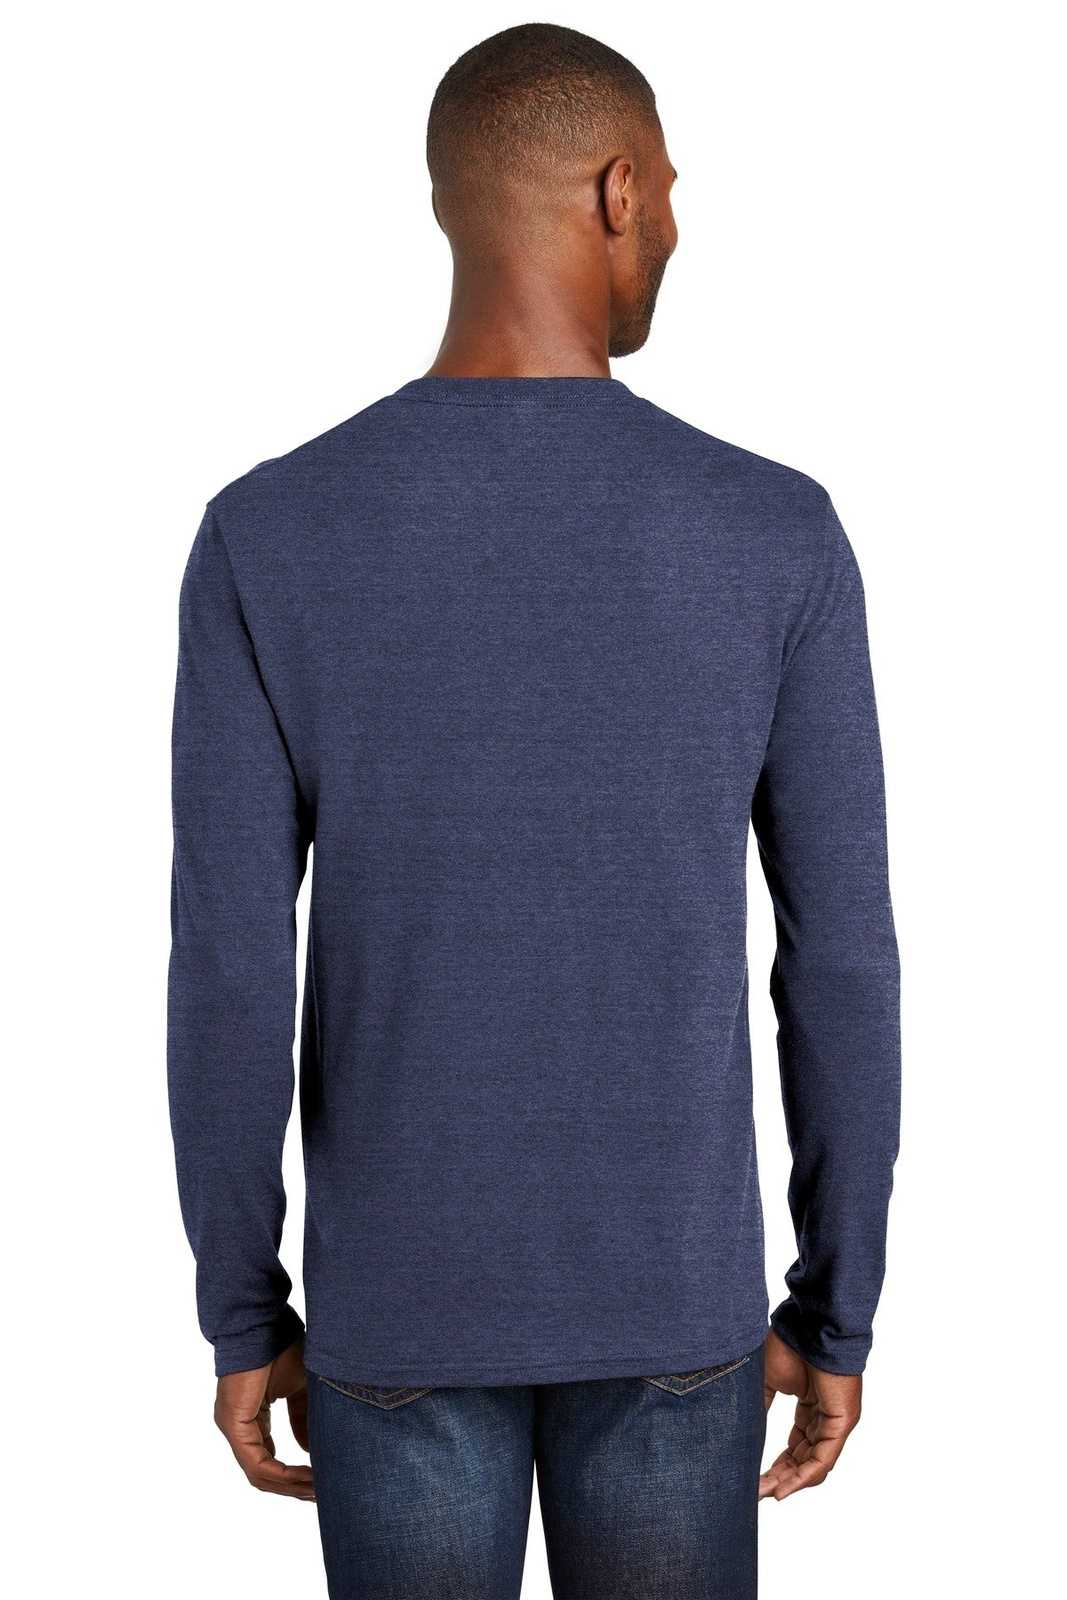 Port &amp; Company PC455LS Long Sleeve Fan Favorite Blend Tee - Team Navy Heather - HIT a Double - 2